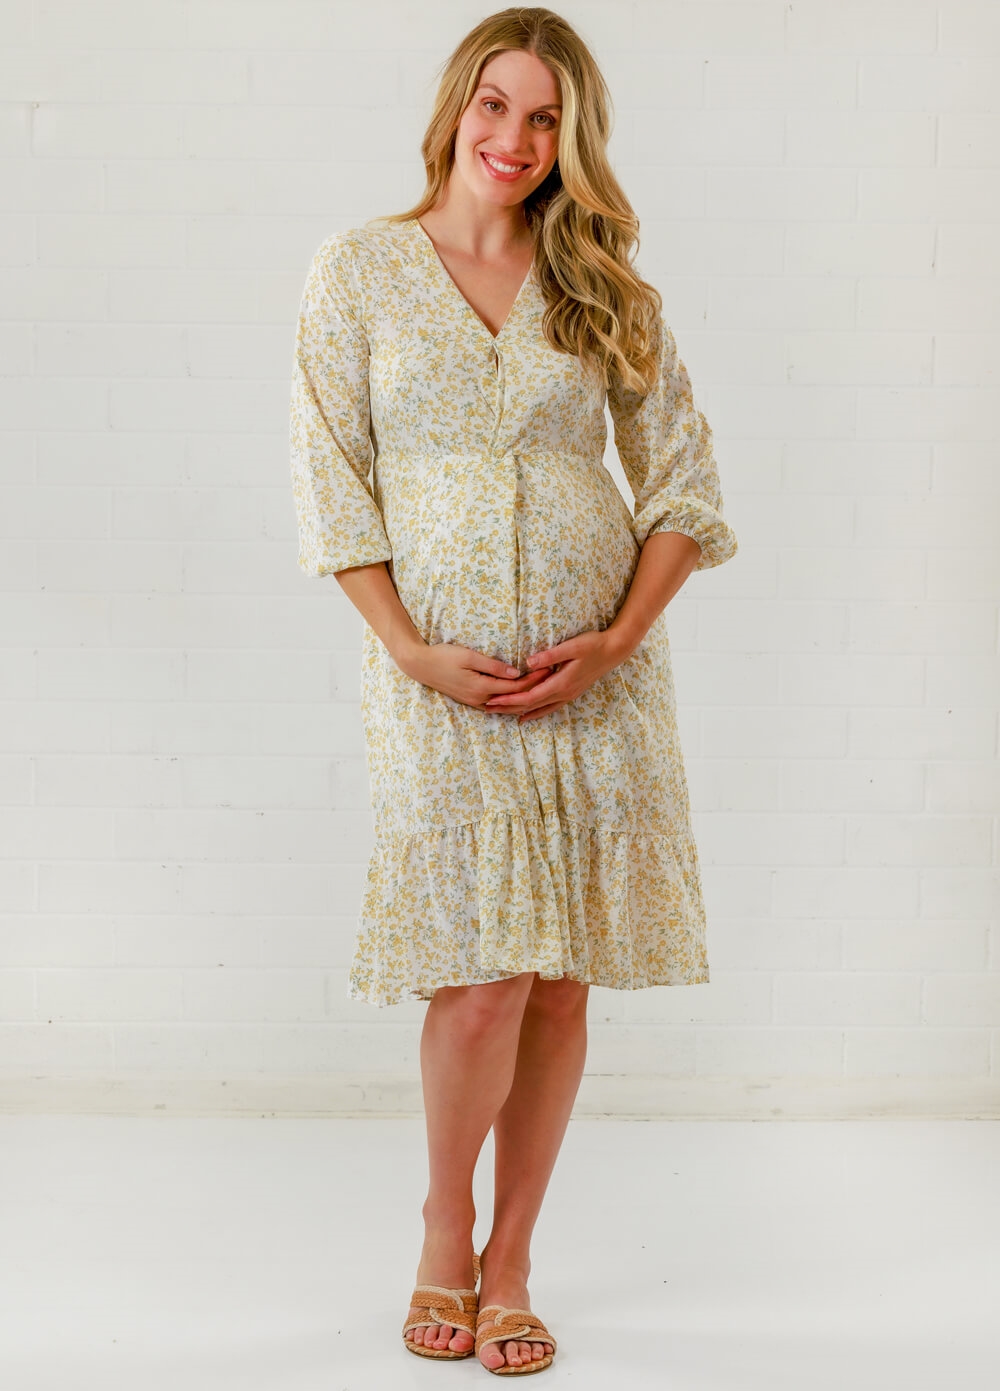 Lait & Co - Etiennette Maternity Dress in Yellow Floral